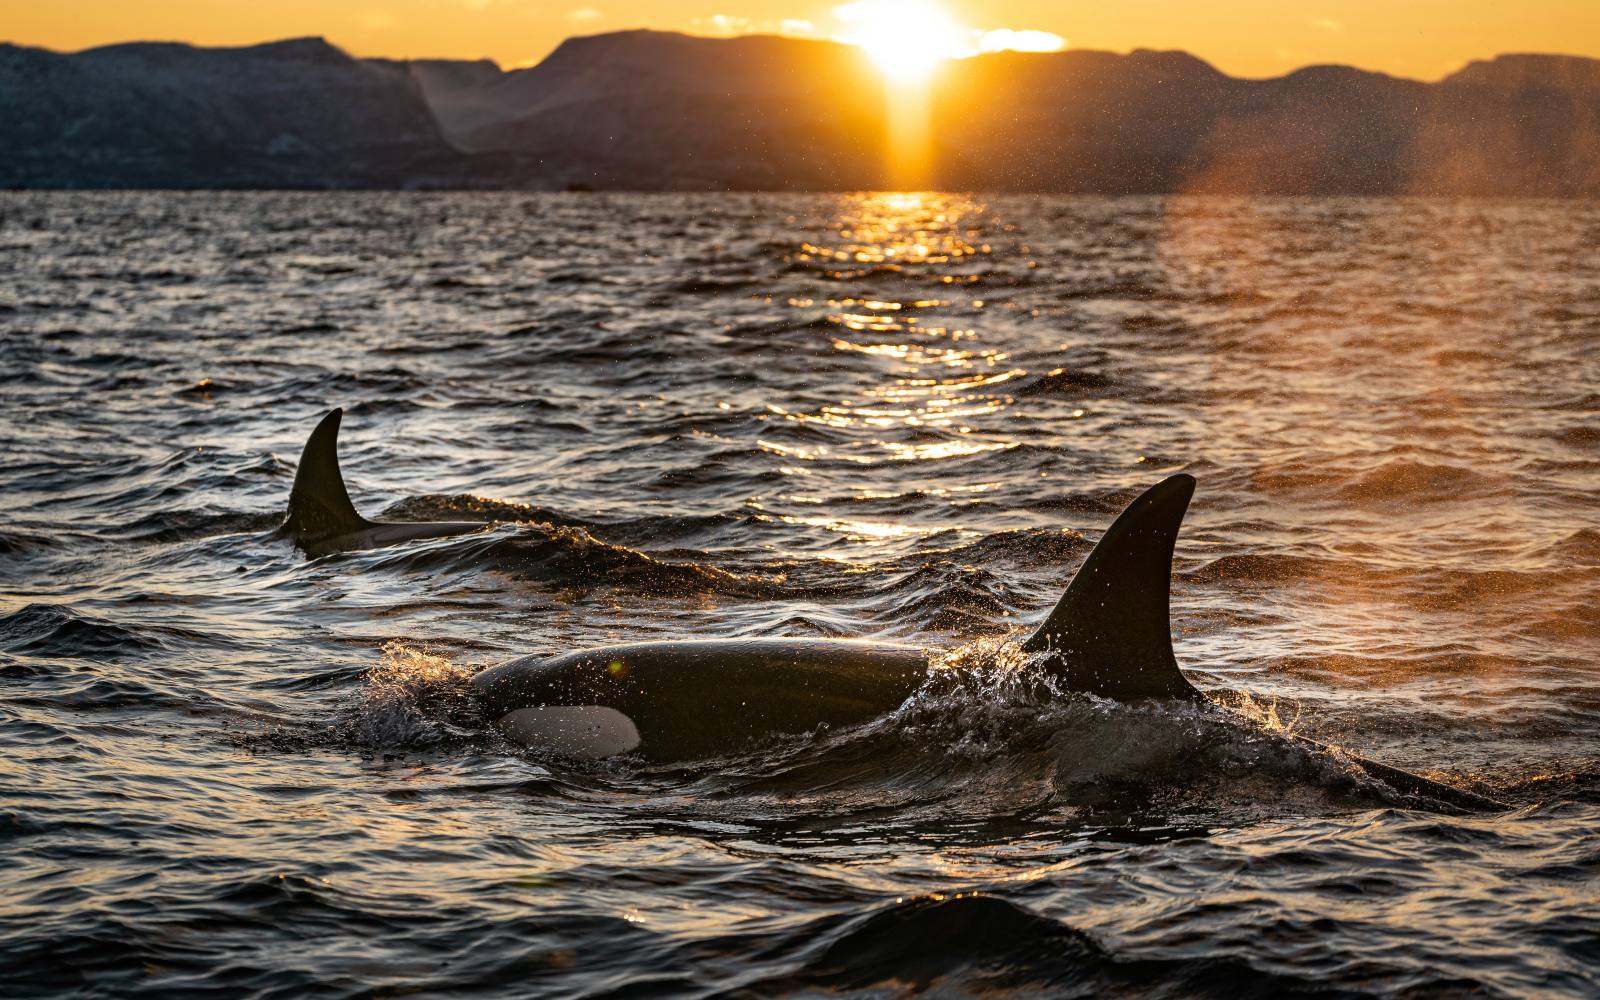 A pod of orcas surface at golden hour on a San Juan Islands whale watching tour.